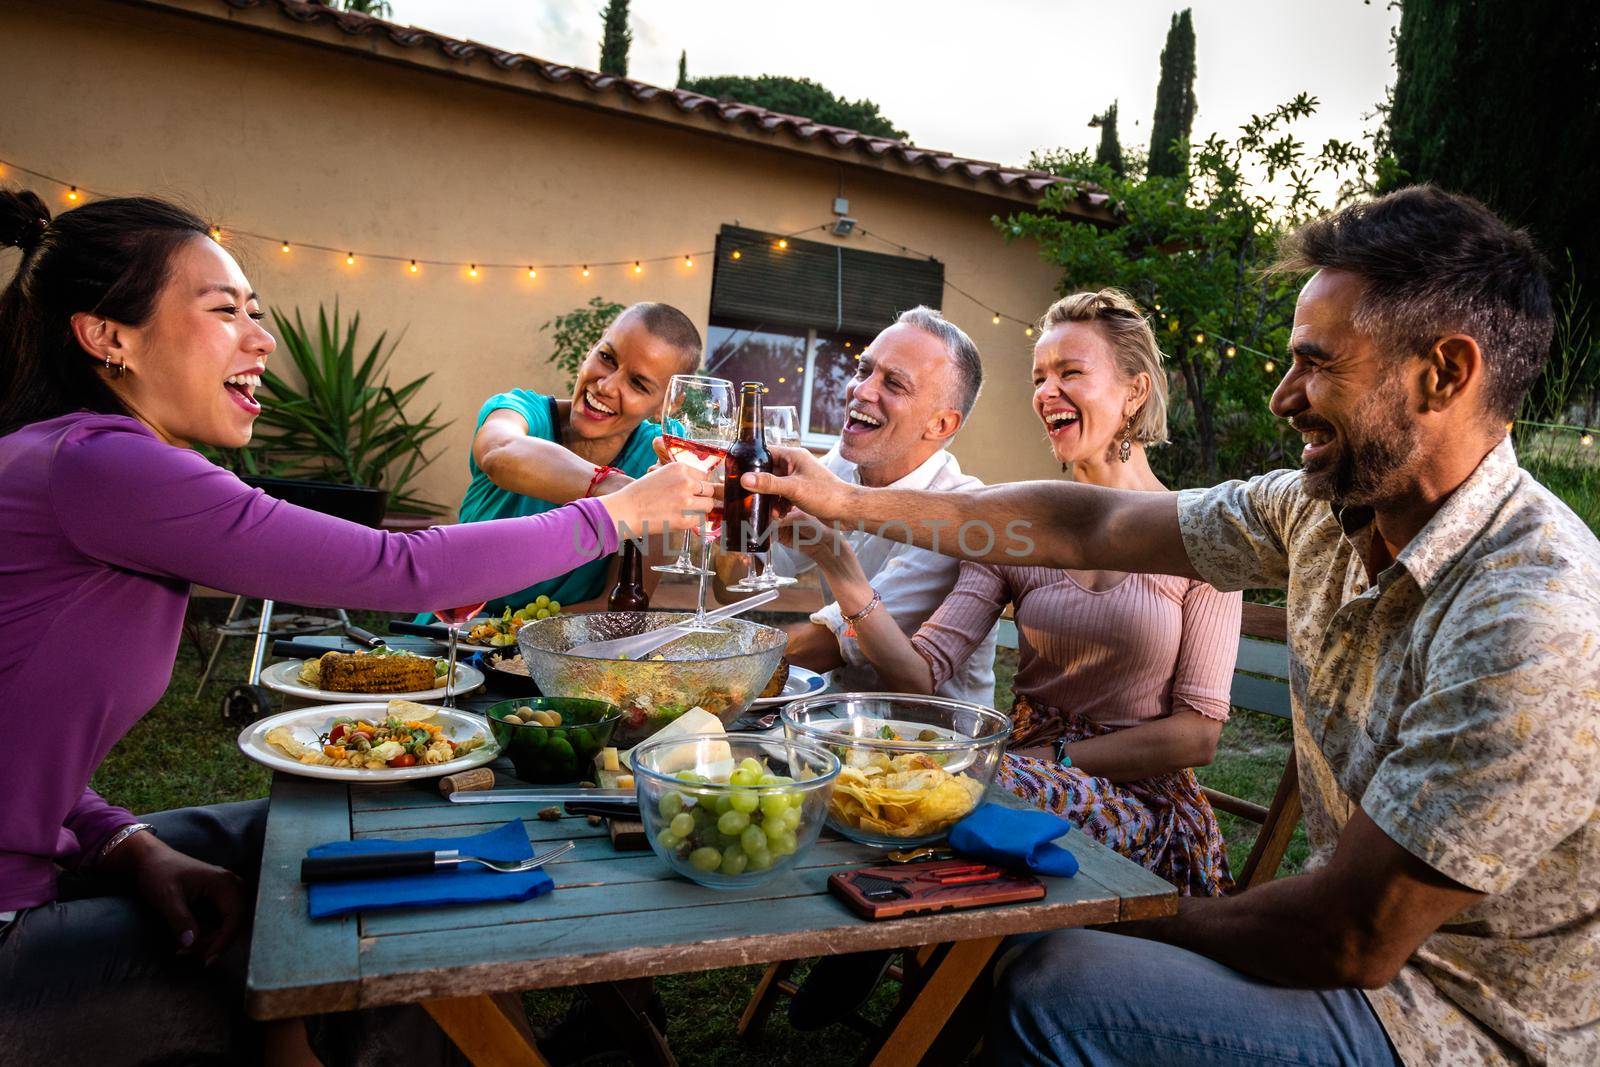 Asian woman having a celebratory toast with wine, laughing and having fun during barbecue garden dinner party at sunset. Friends having fun. Lifestyle.